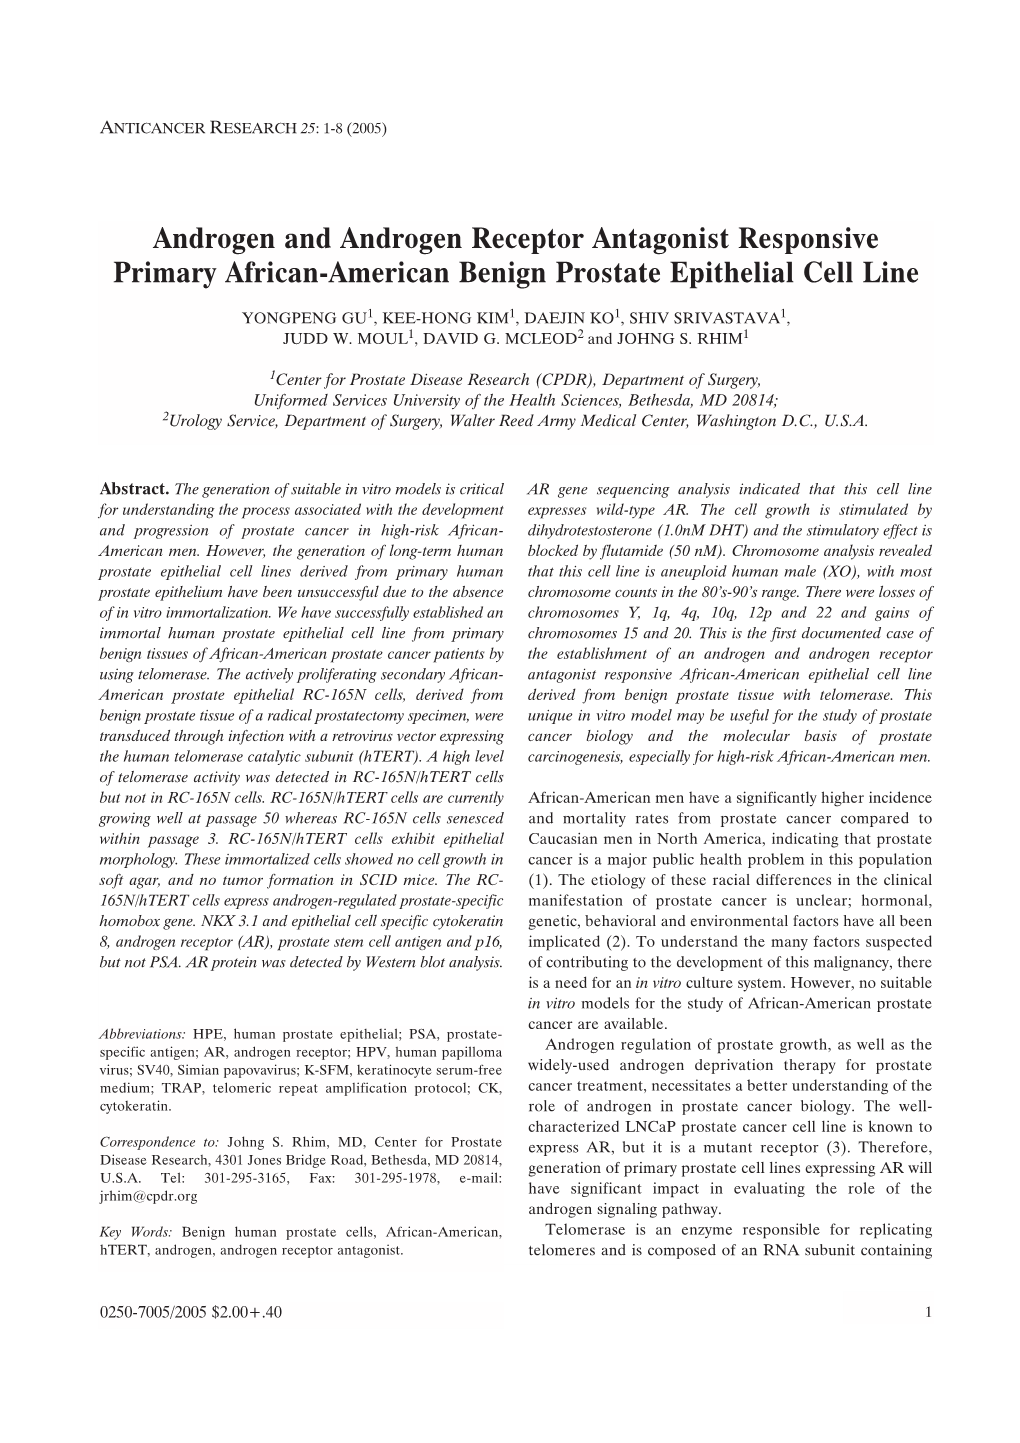 Androgen and Androgen Receptor Antagonist Responsive Primary African-American Benign Prostate Epithelial Cell Line